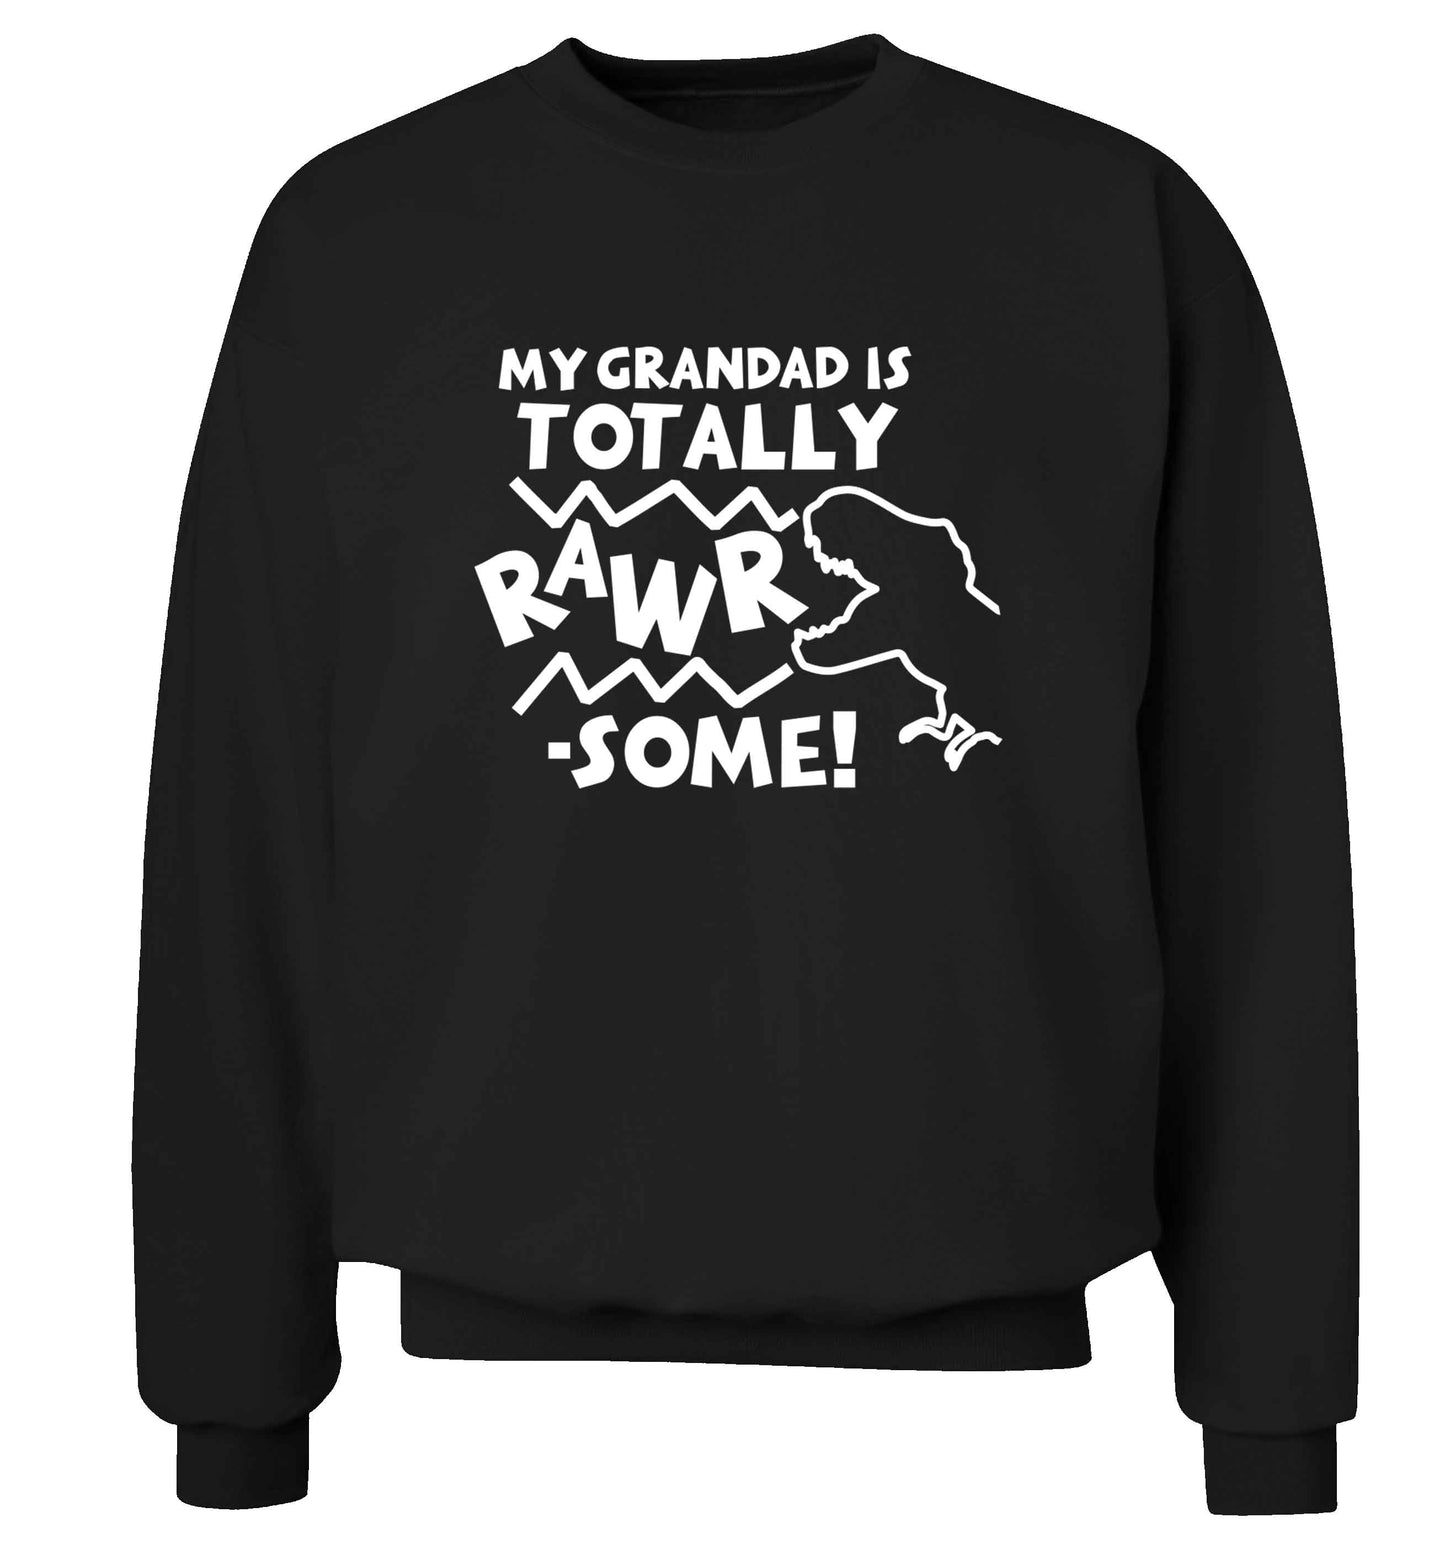 My grandad is totally rawrsome adult's unisex black sweater 2XL